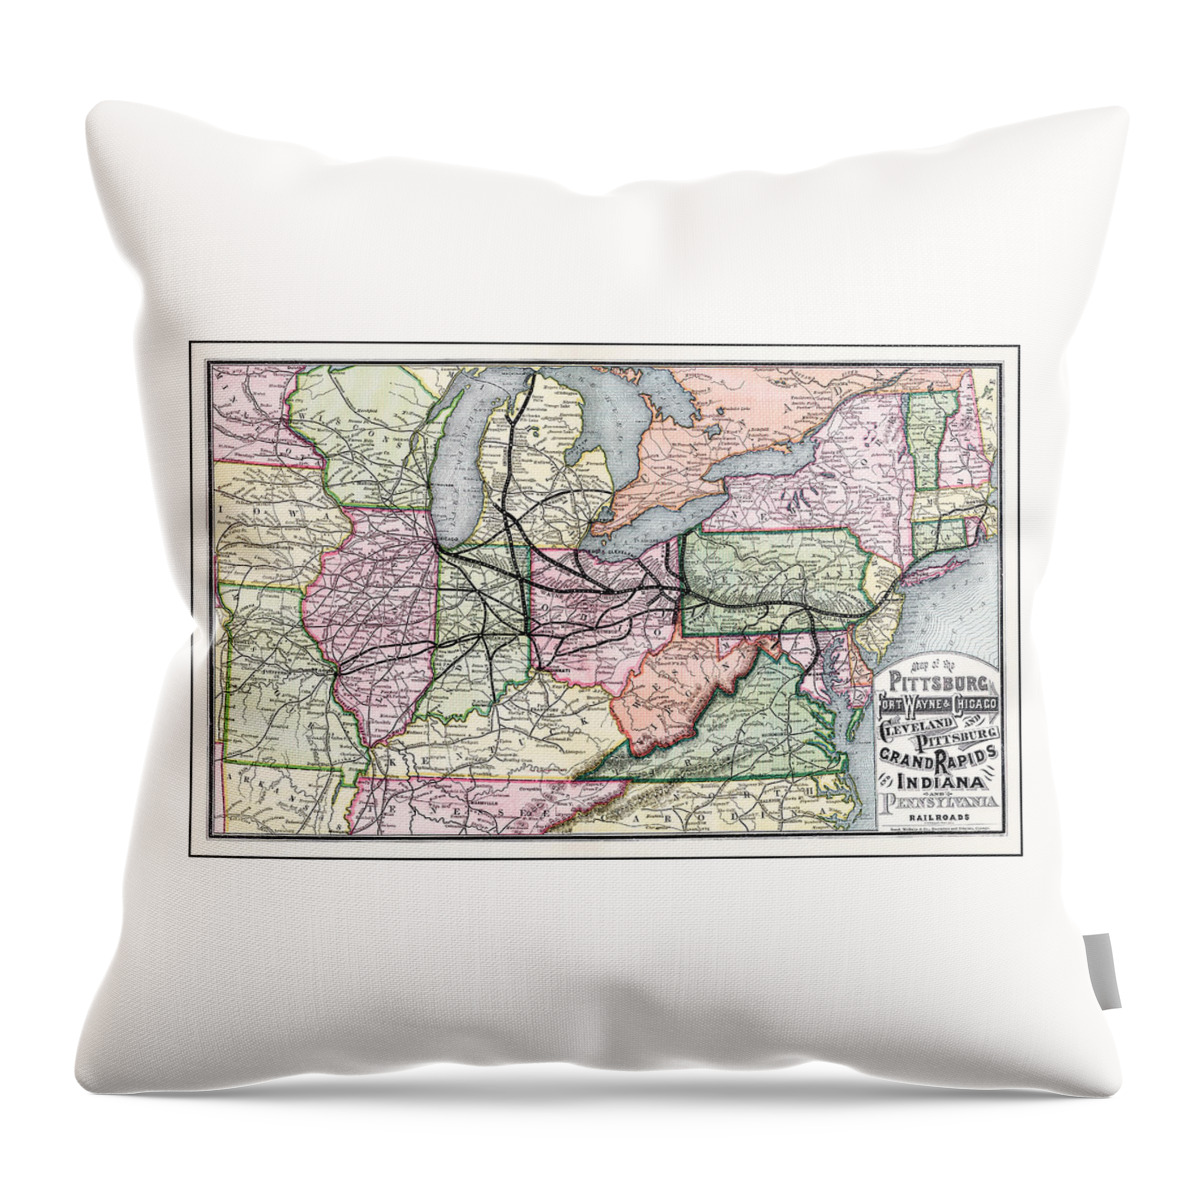 Railroad Throw Pillow featuring the photograph Vintage Railroad Map 1874 Pittsburgh and Beyond by Carol Japp